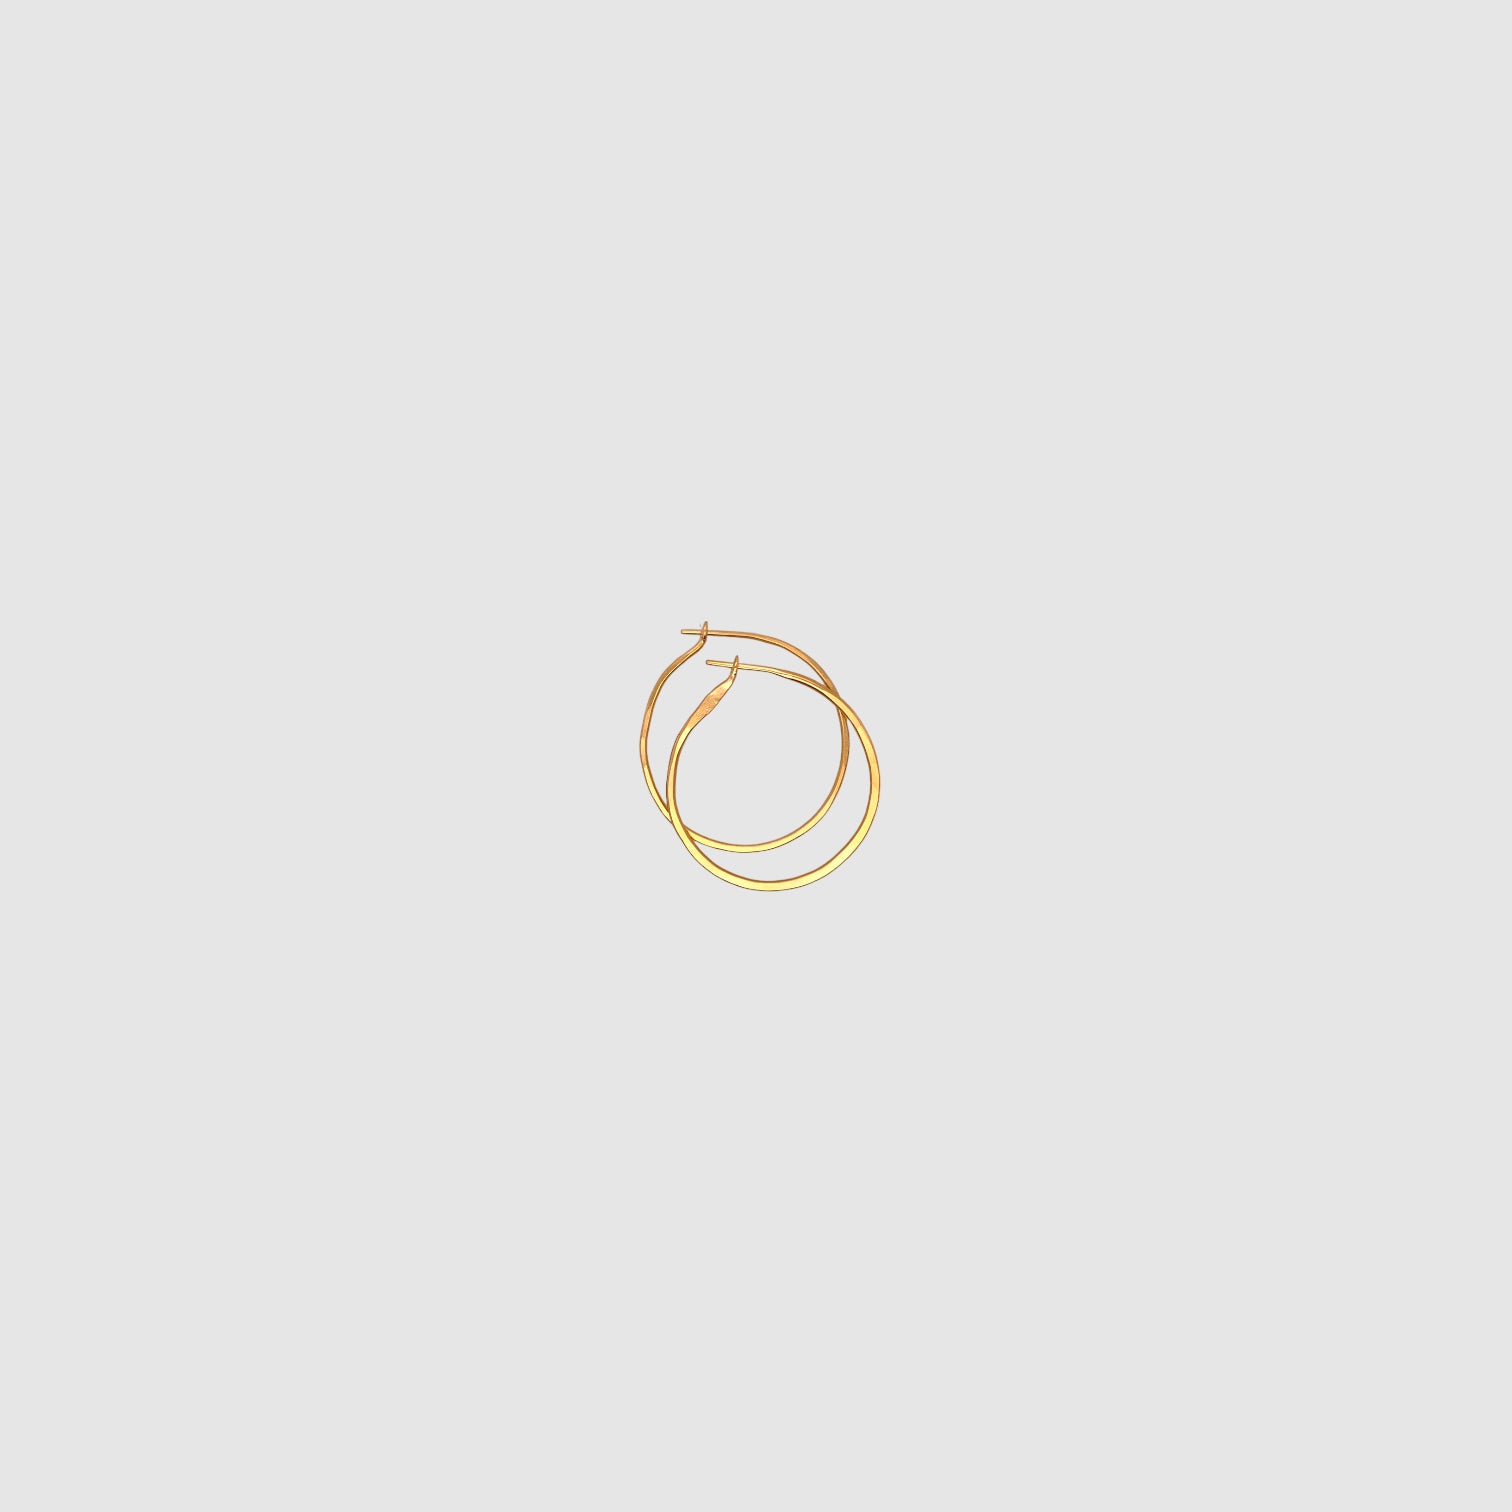 HOOPS // SMALL // ROUND // VERMEIL